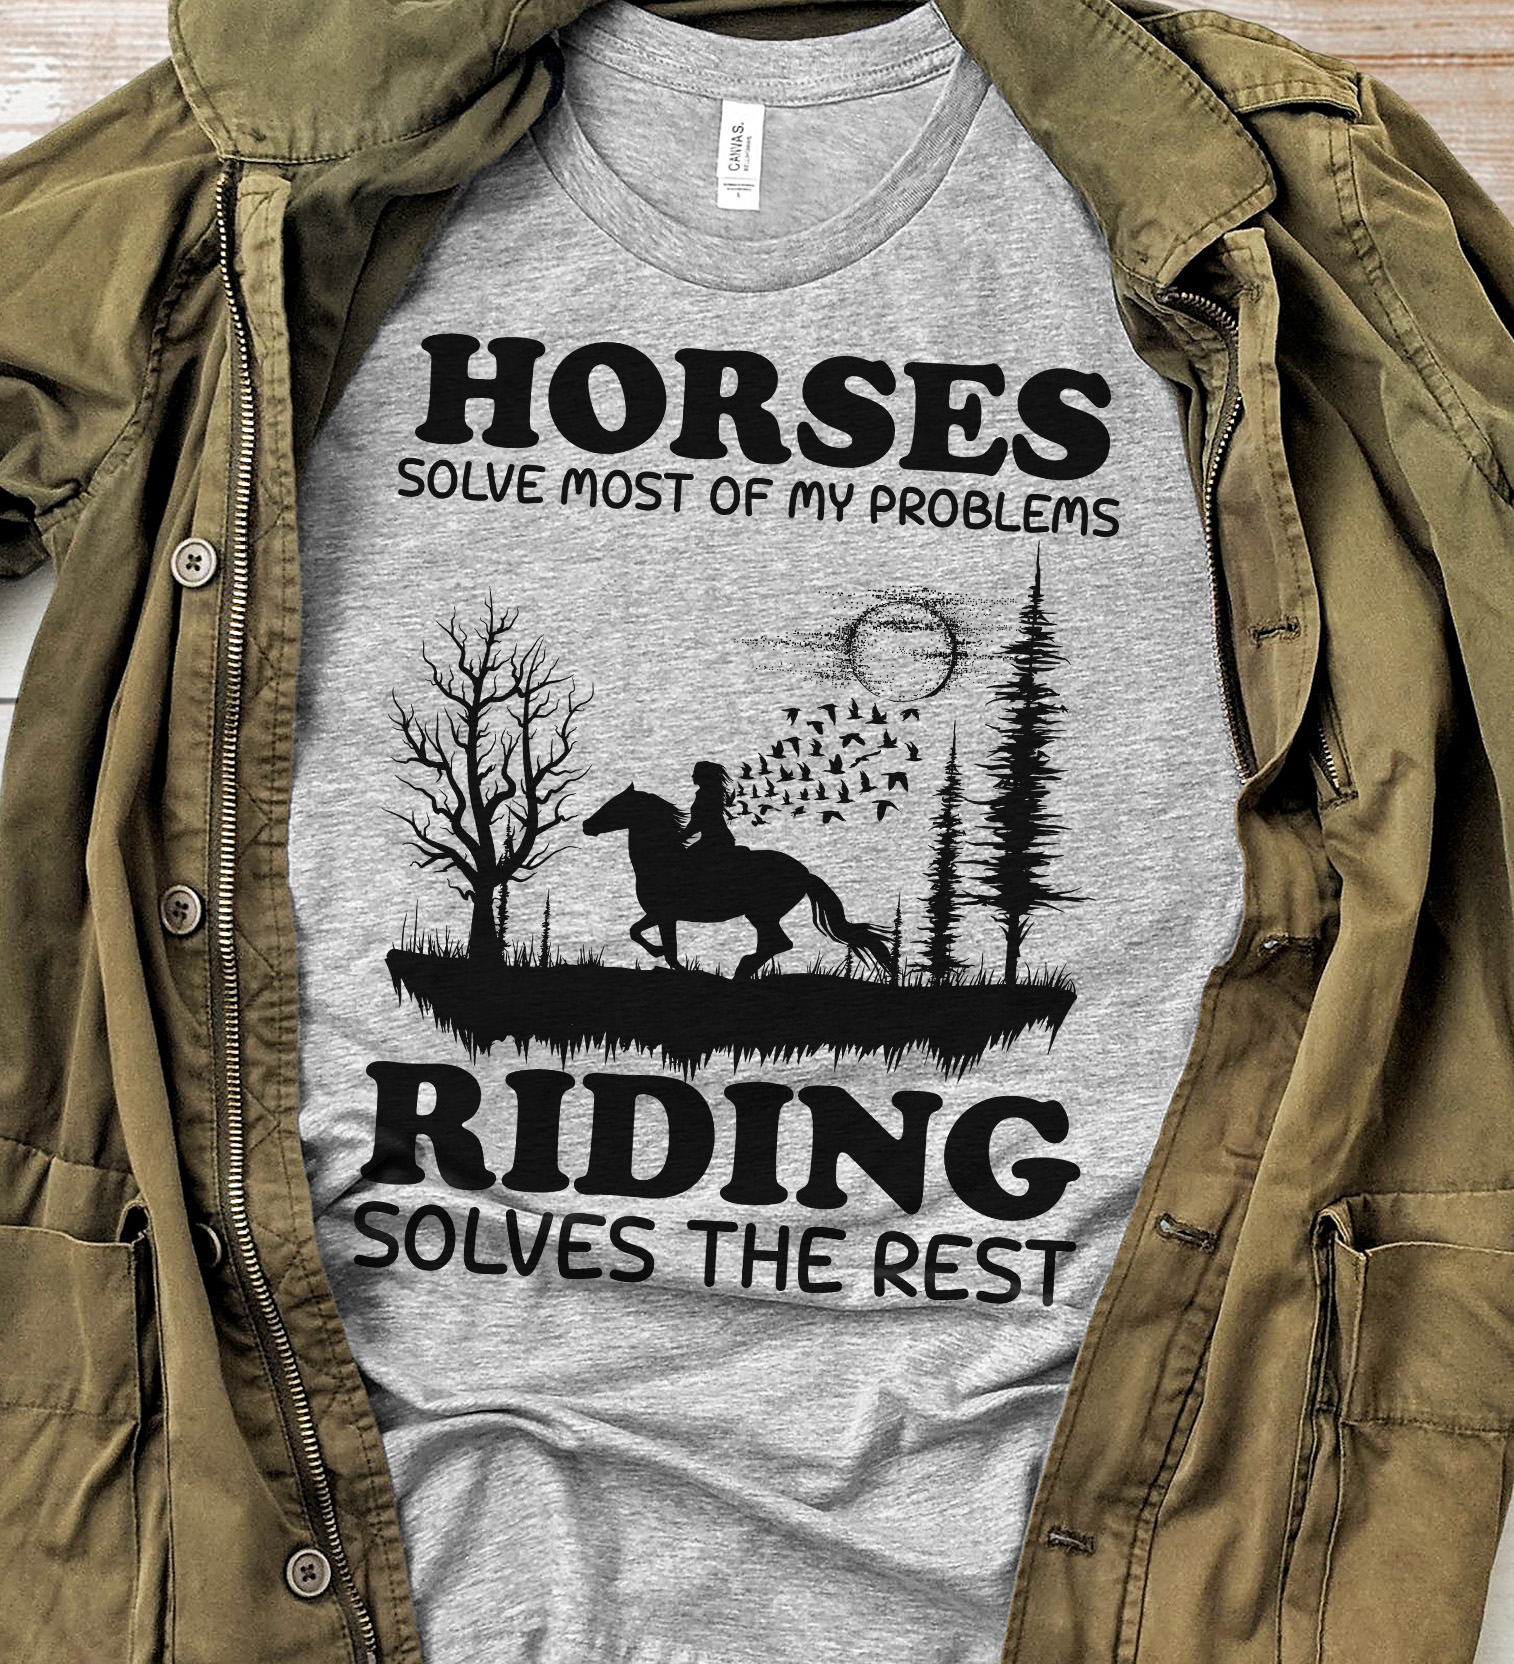 Horse solve most of my problems riding solves the rest - Love riding horse